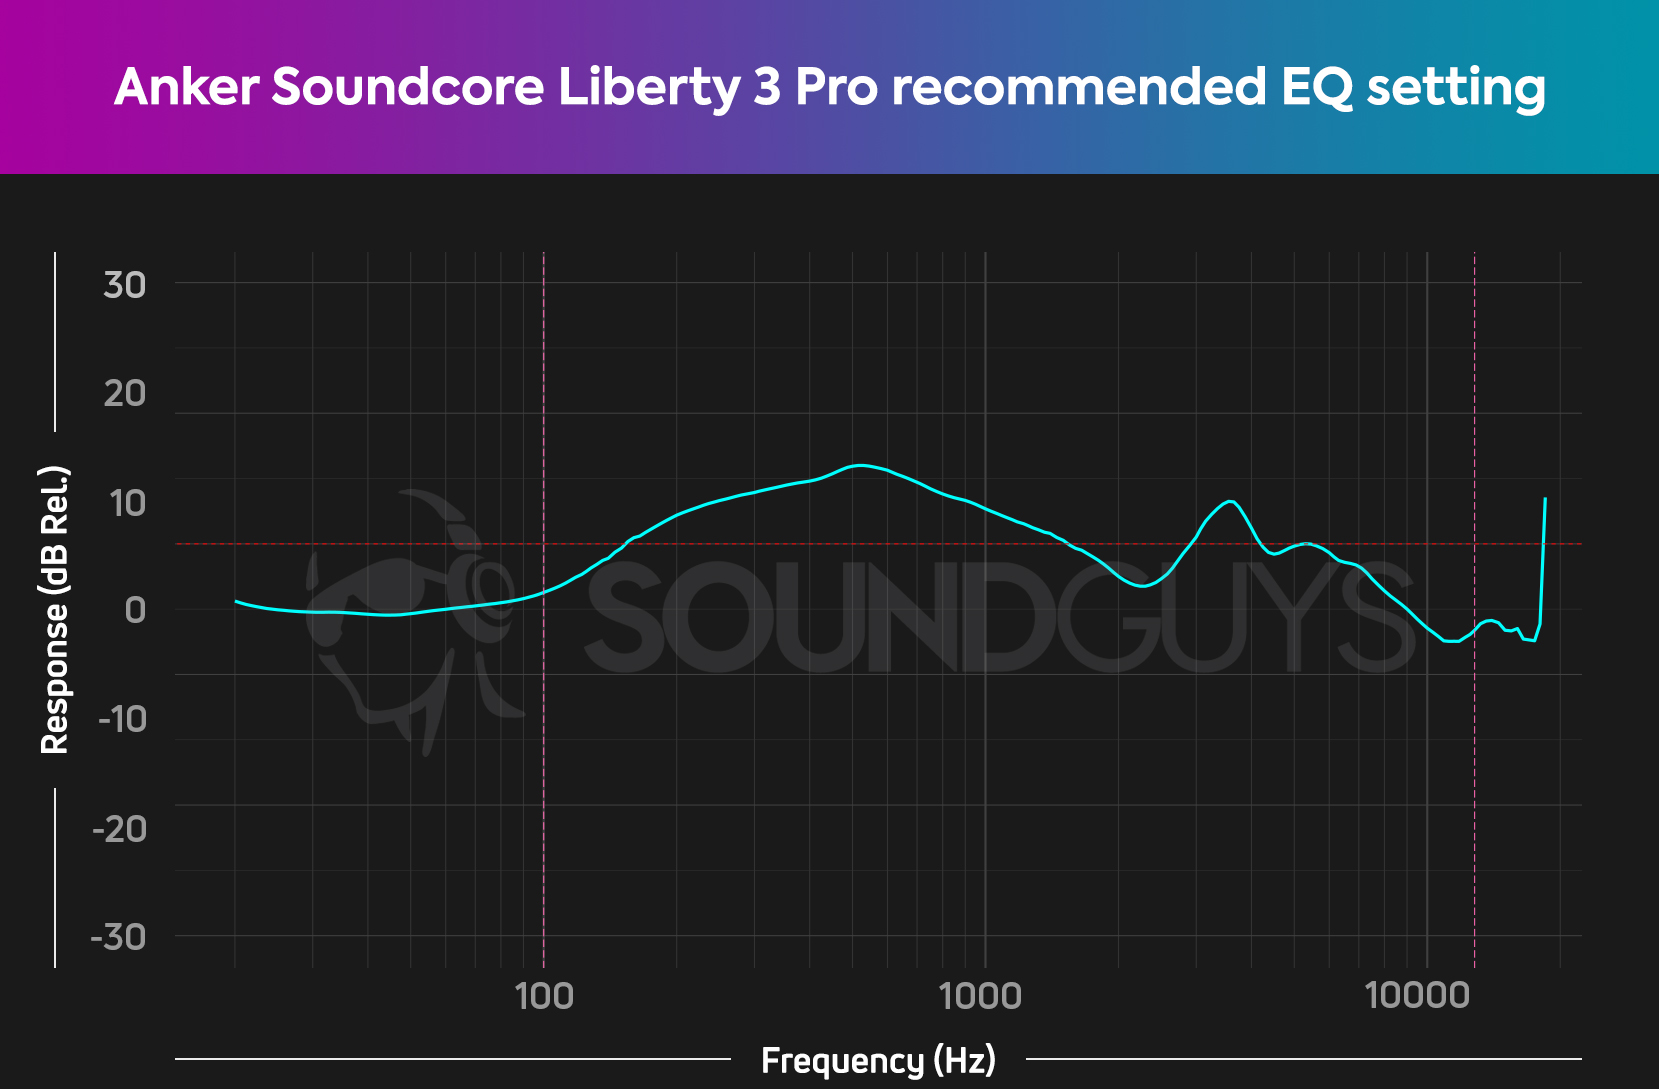 A chart showing the recommended EQ setting for the Anker Souncore Liberty 3 Pro earbuds